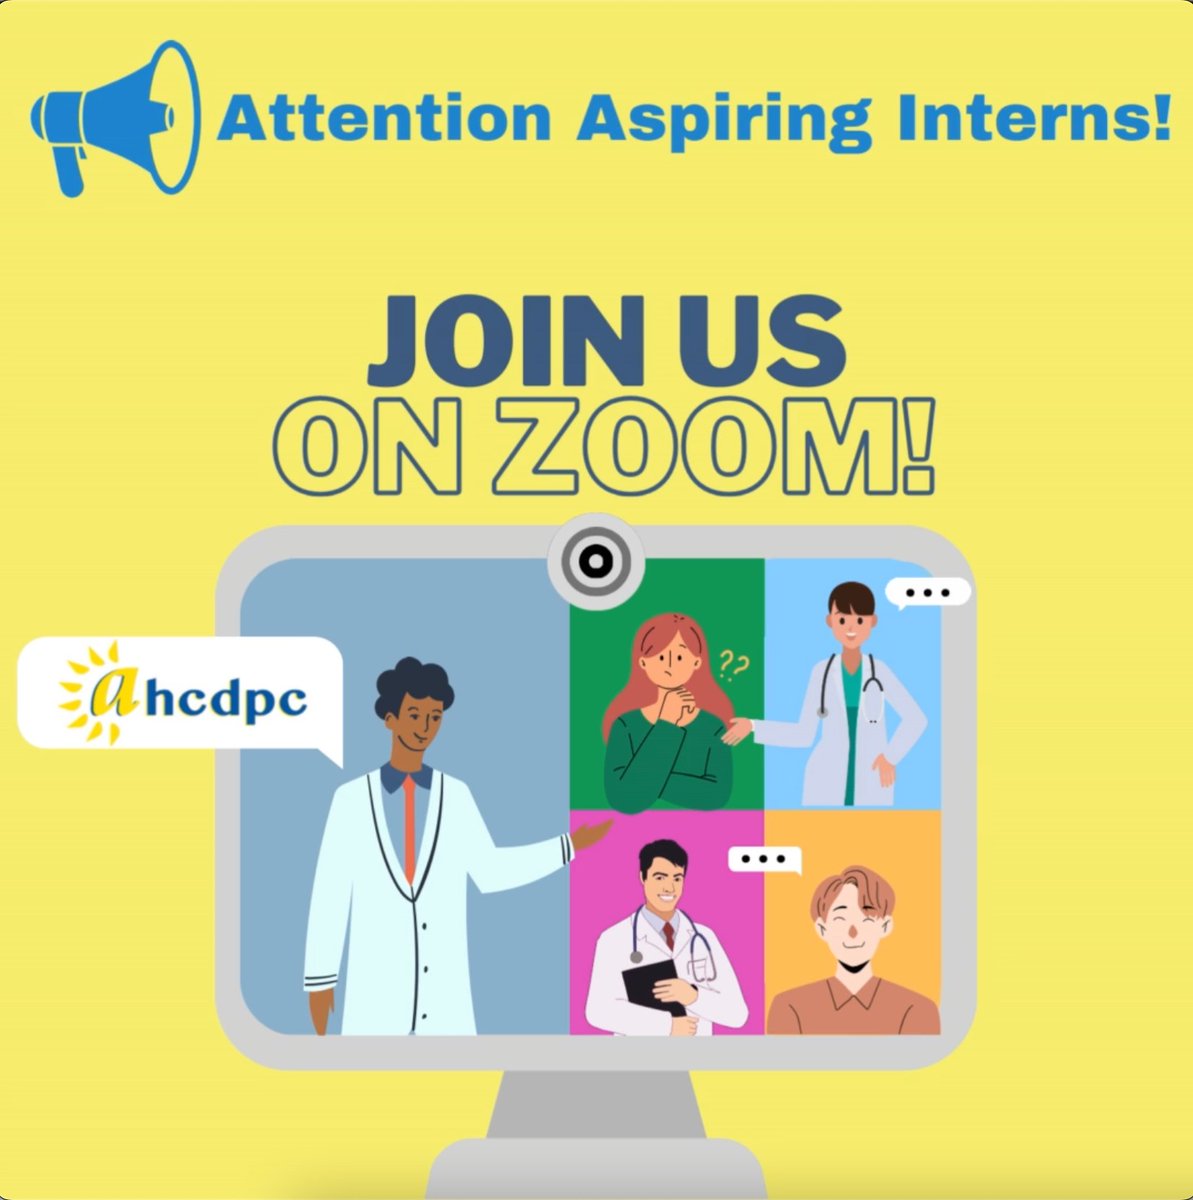 🌟 Florida & Georgia Interns! 🚀 Join us Advocates for Healthcare  we're offering PAID internships in various roles like social media, administration, patient advocacy, and more! Sign up for a meeting to learn more! 💼 ahcdpc.com/stay-in-the-kn…
#Paidinternship #Healthcare #Florida